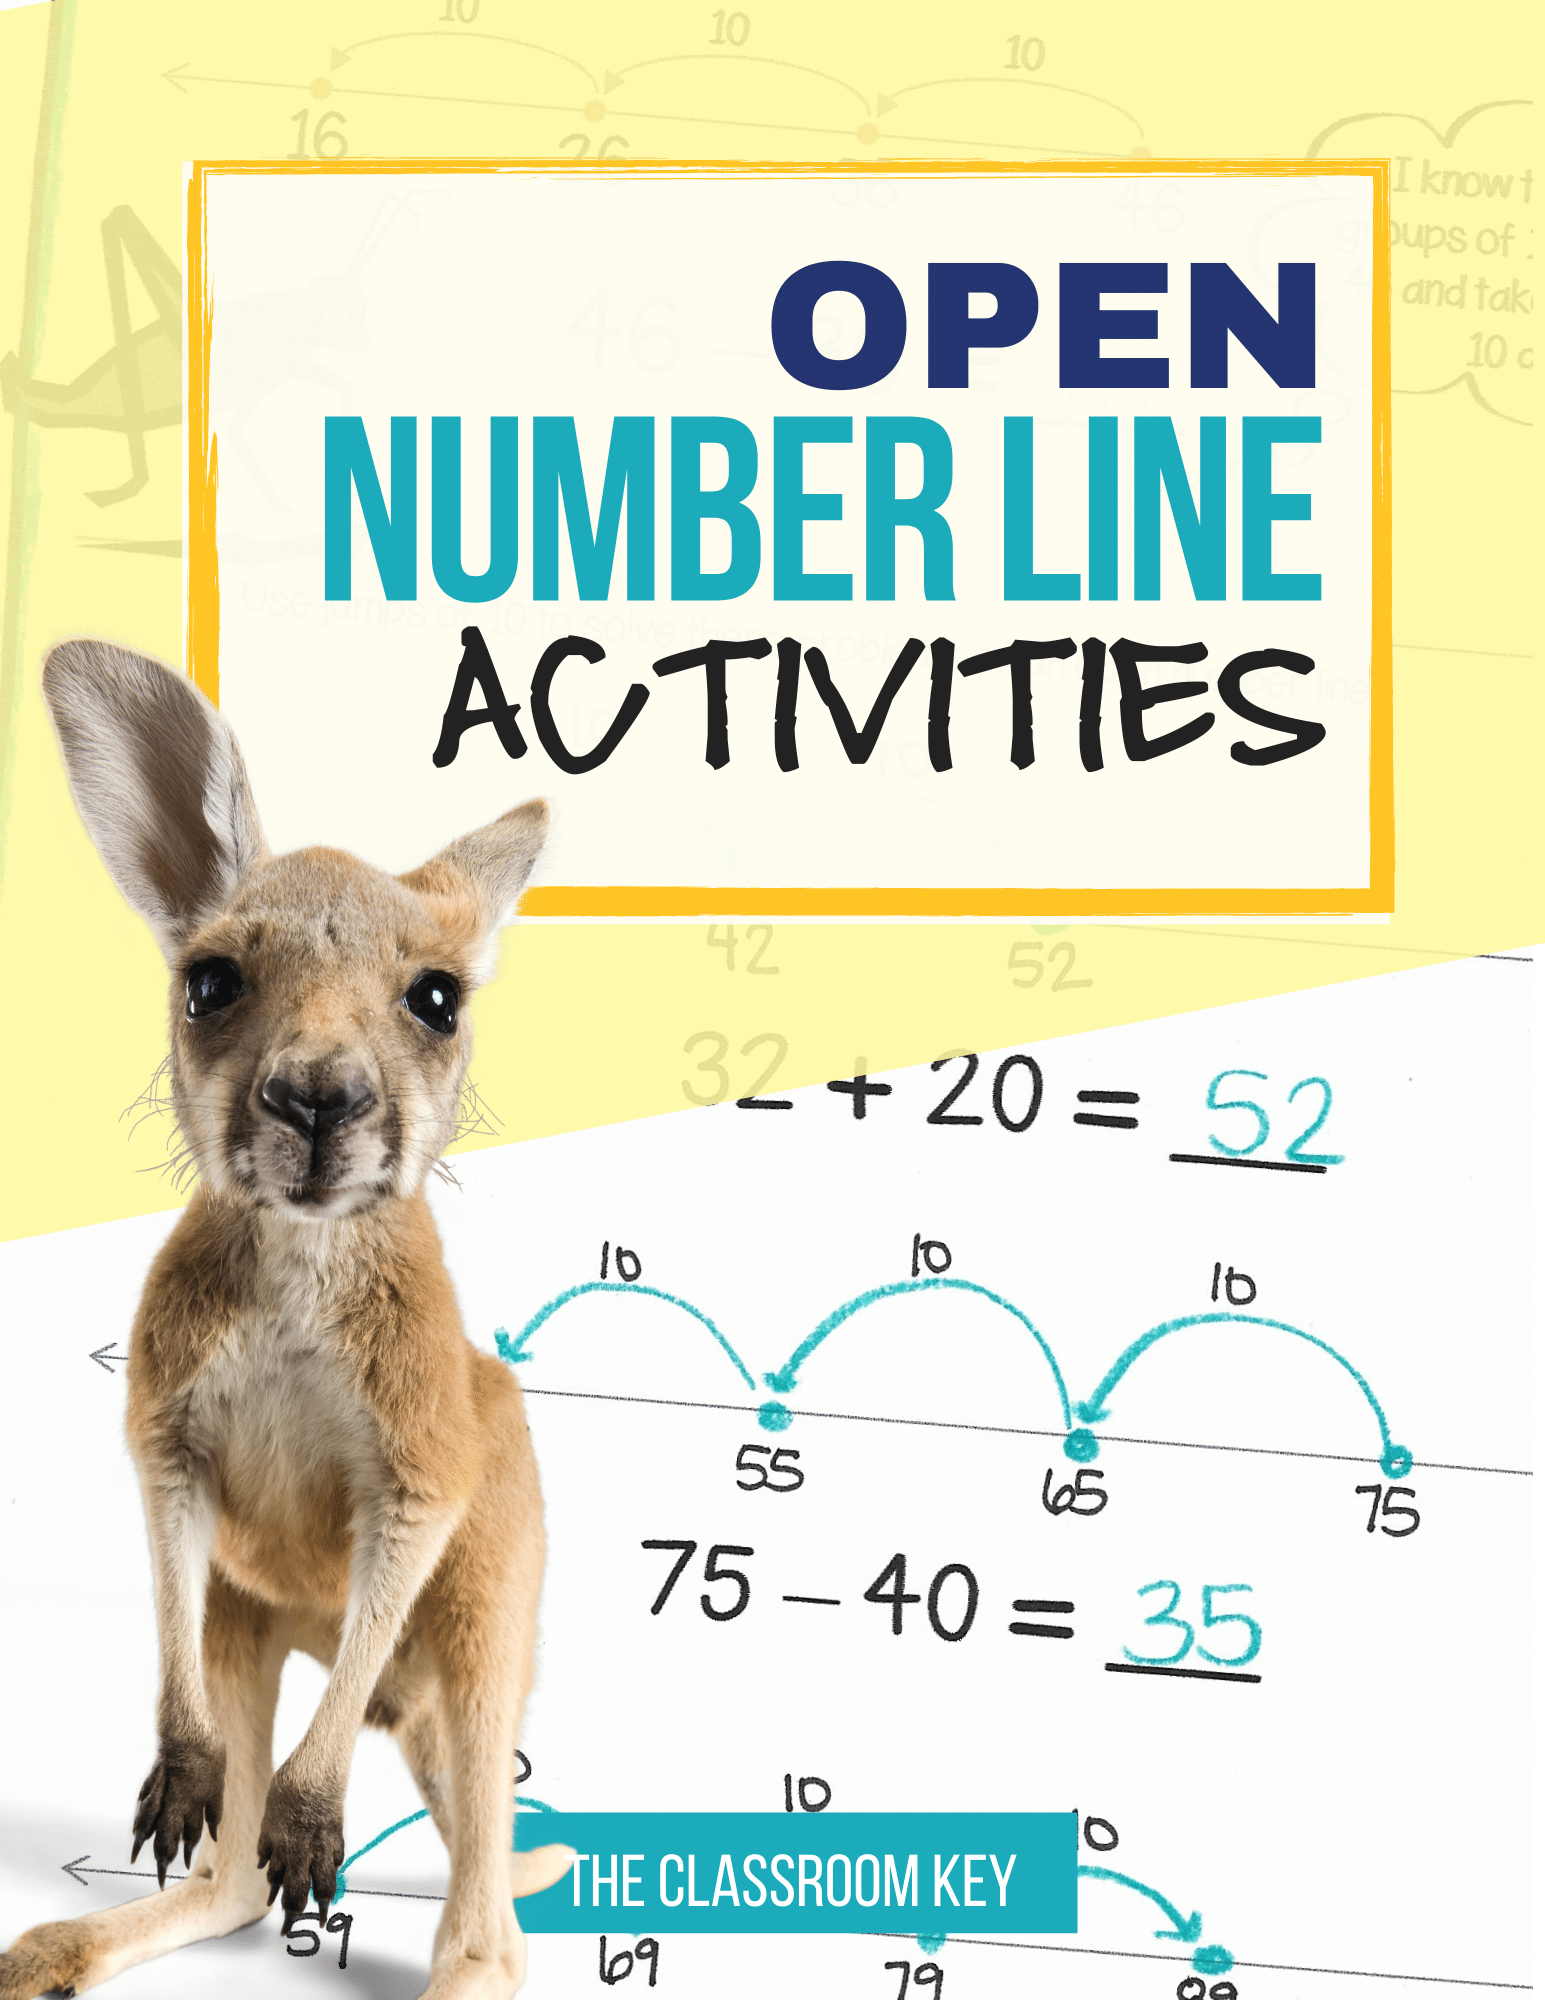 Teach addition and subtraction within 100 using the open number lines strategy. Easy to teach with examples on the top of each page. Perfect for 2nd graders learning mental math and regrouping. Addresses Common Core standard 2.NBT.B.5